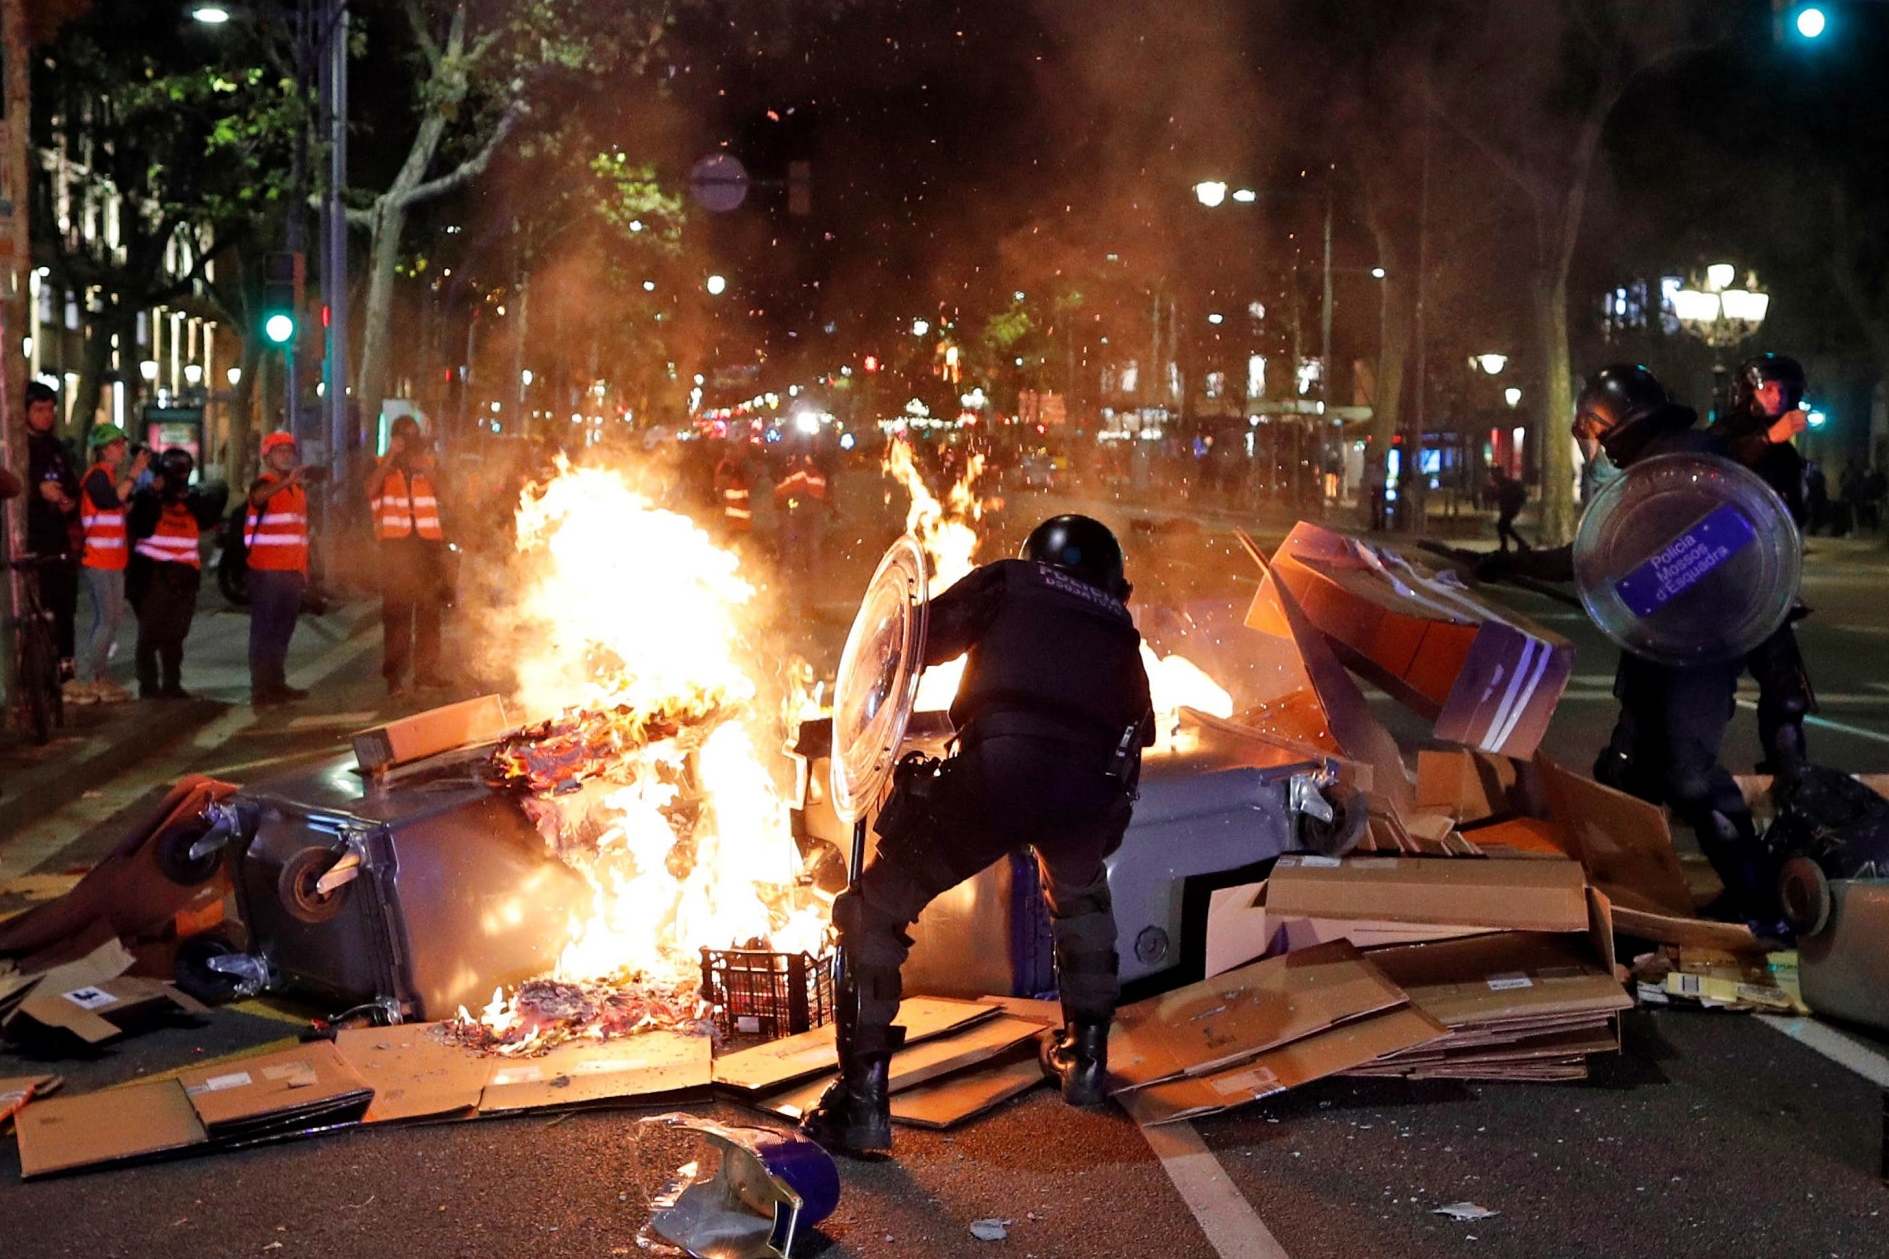 Riot police members try to put out the fire of a barricade during a protest in Barcelona